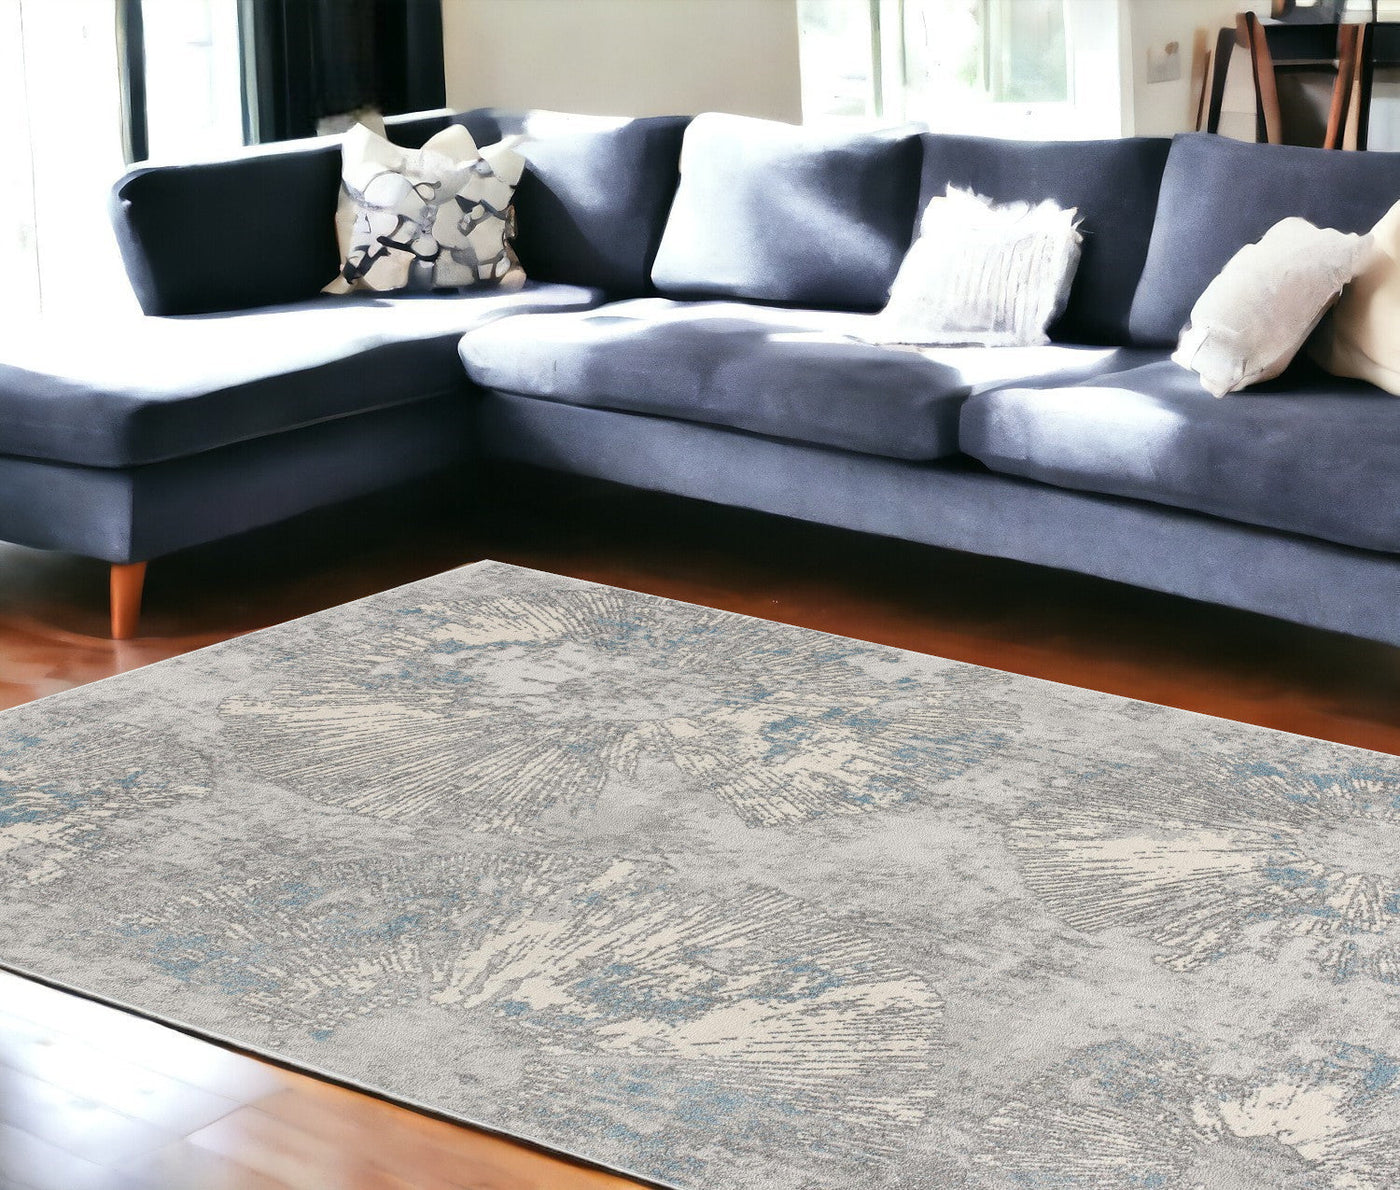 3’ X 5’ Blue Abstract Dhurrie Area Rug - 7’ x 10’ - Area Rugs